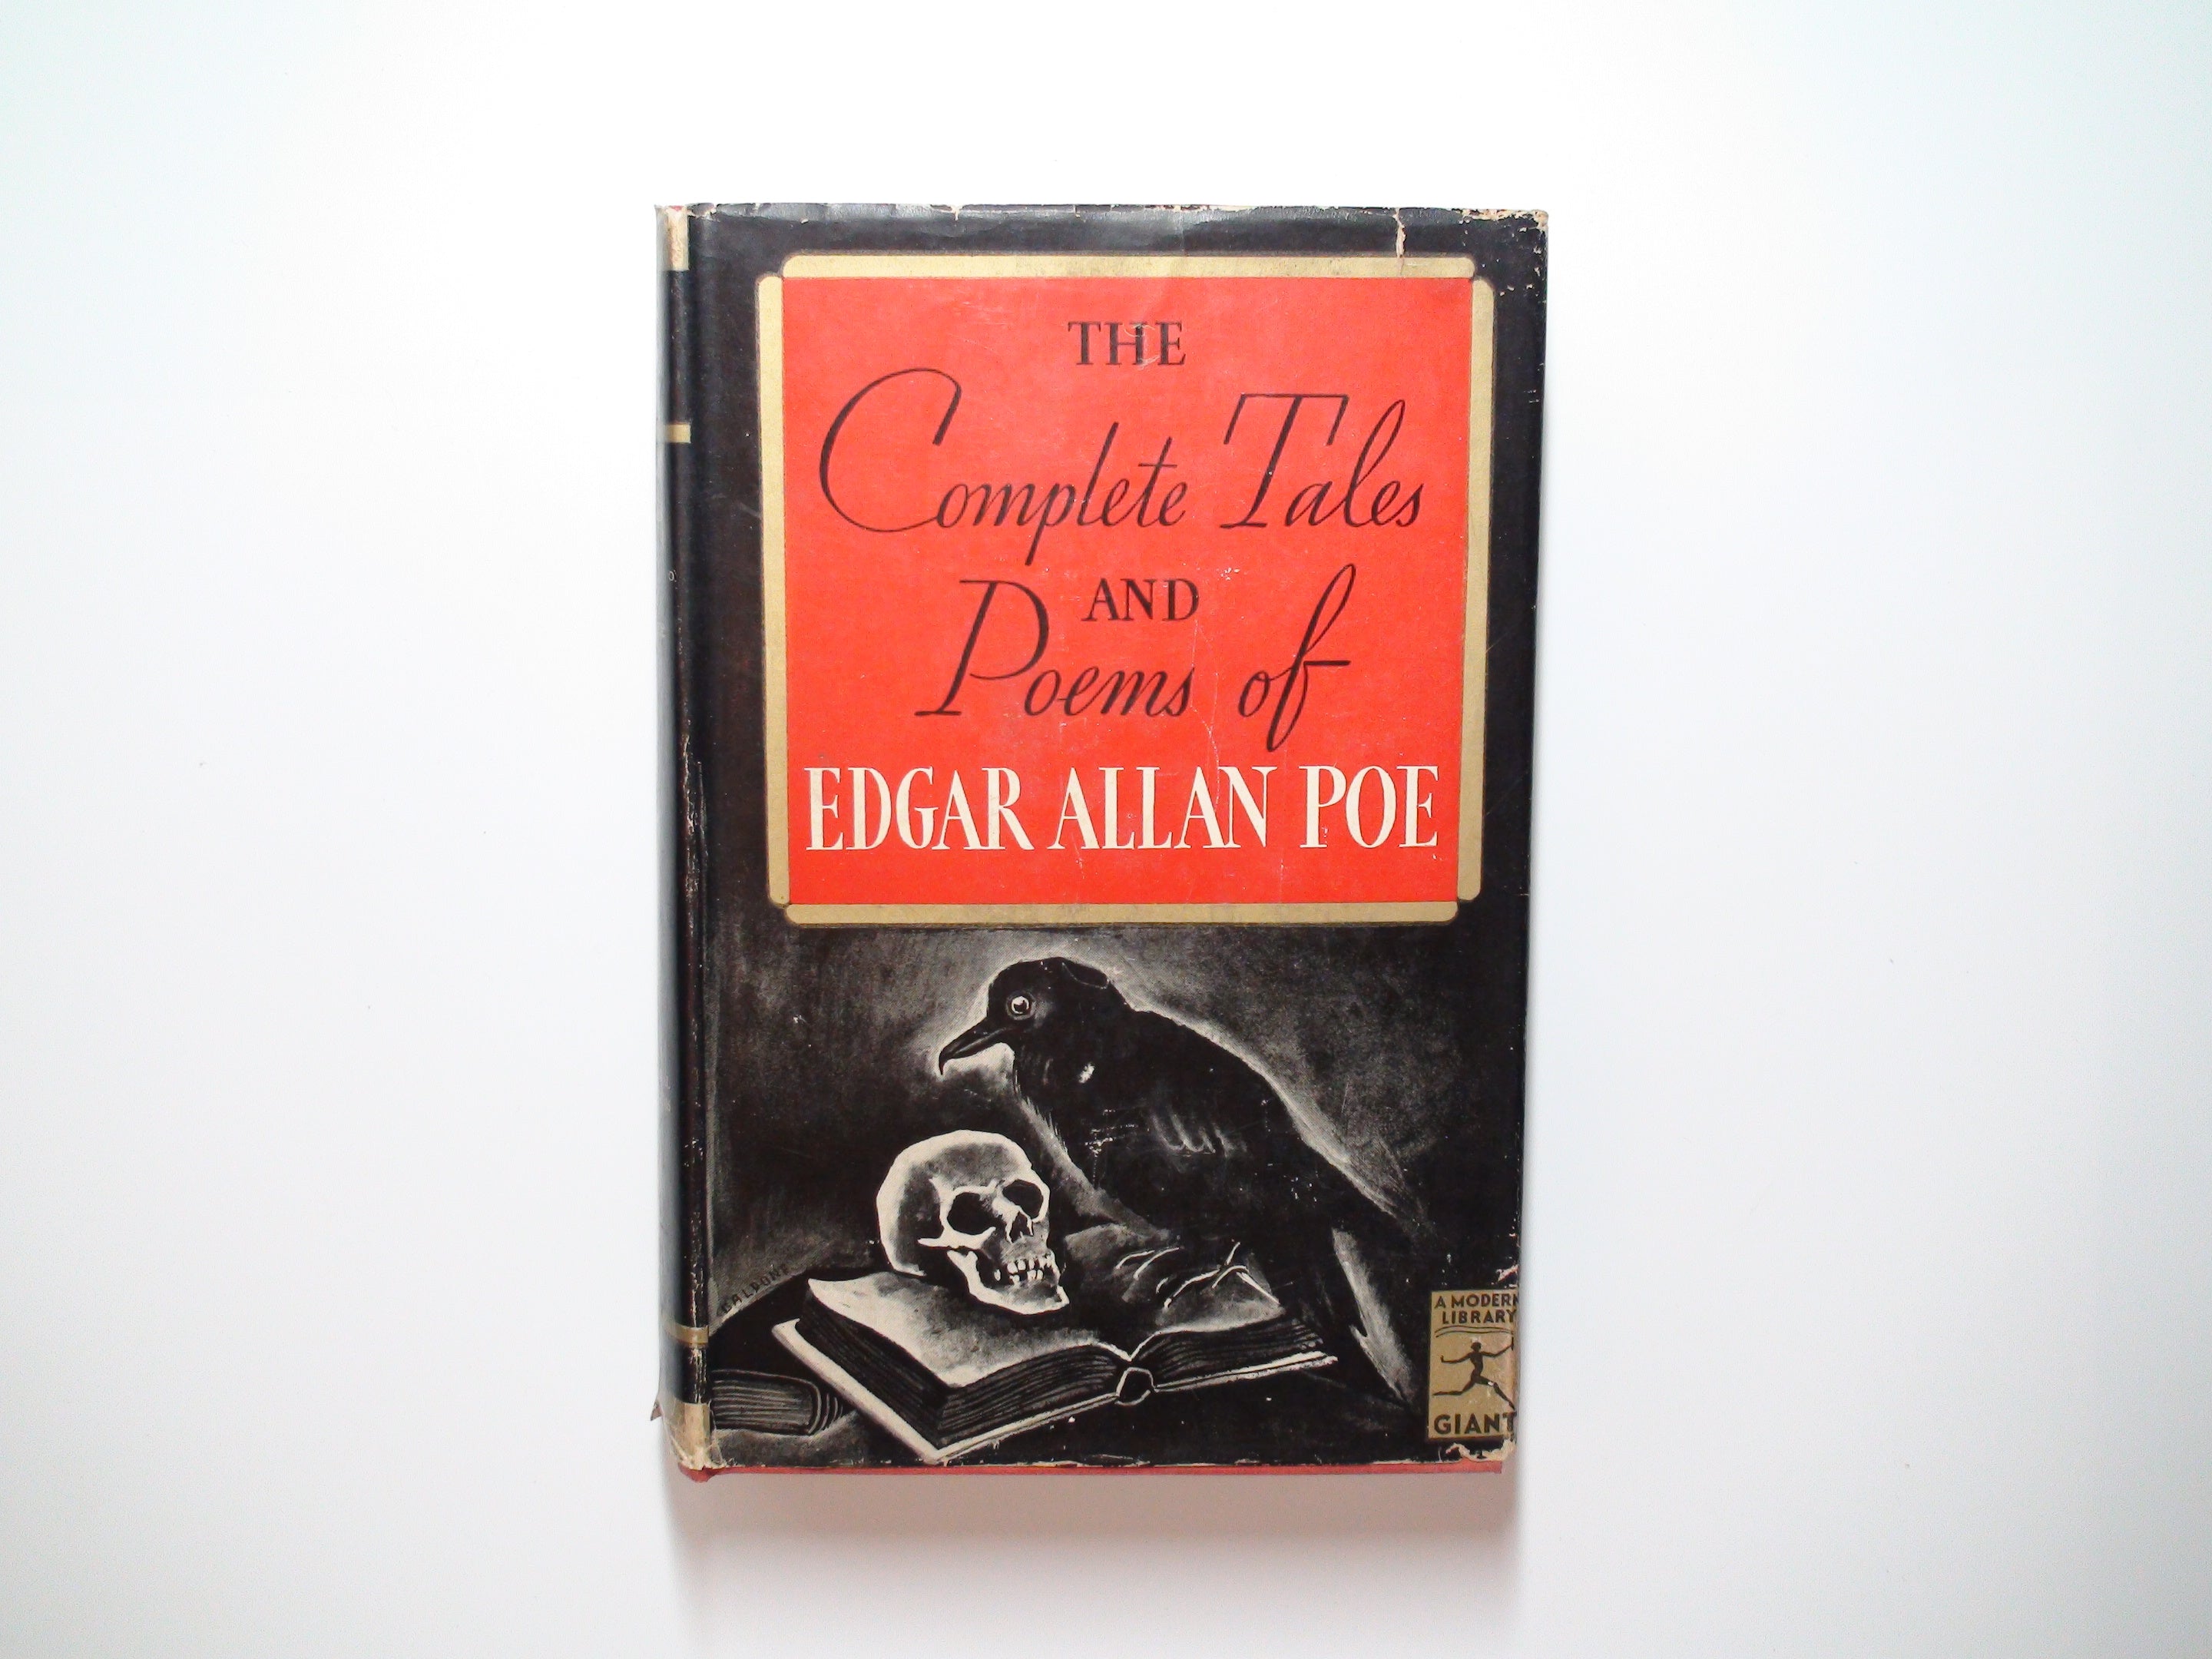 The Complete Tales and Poems of Edgar Allan Poe, Modern Library (GIANT), 1938